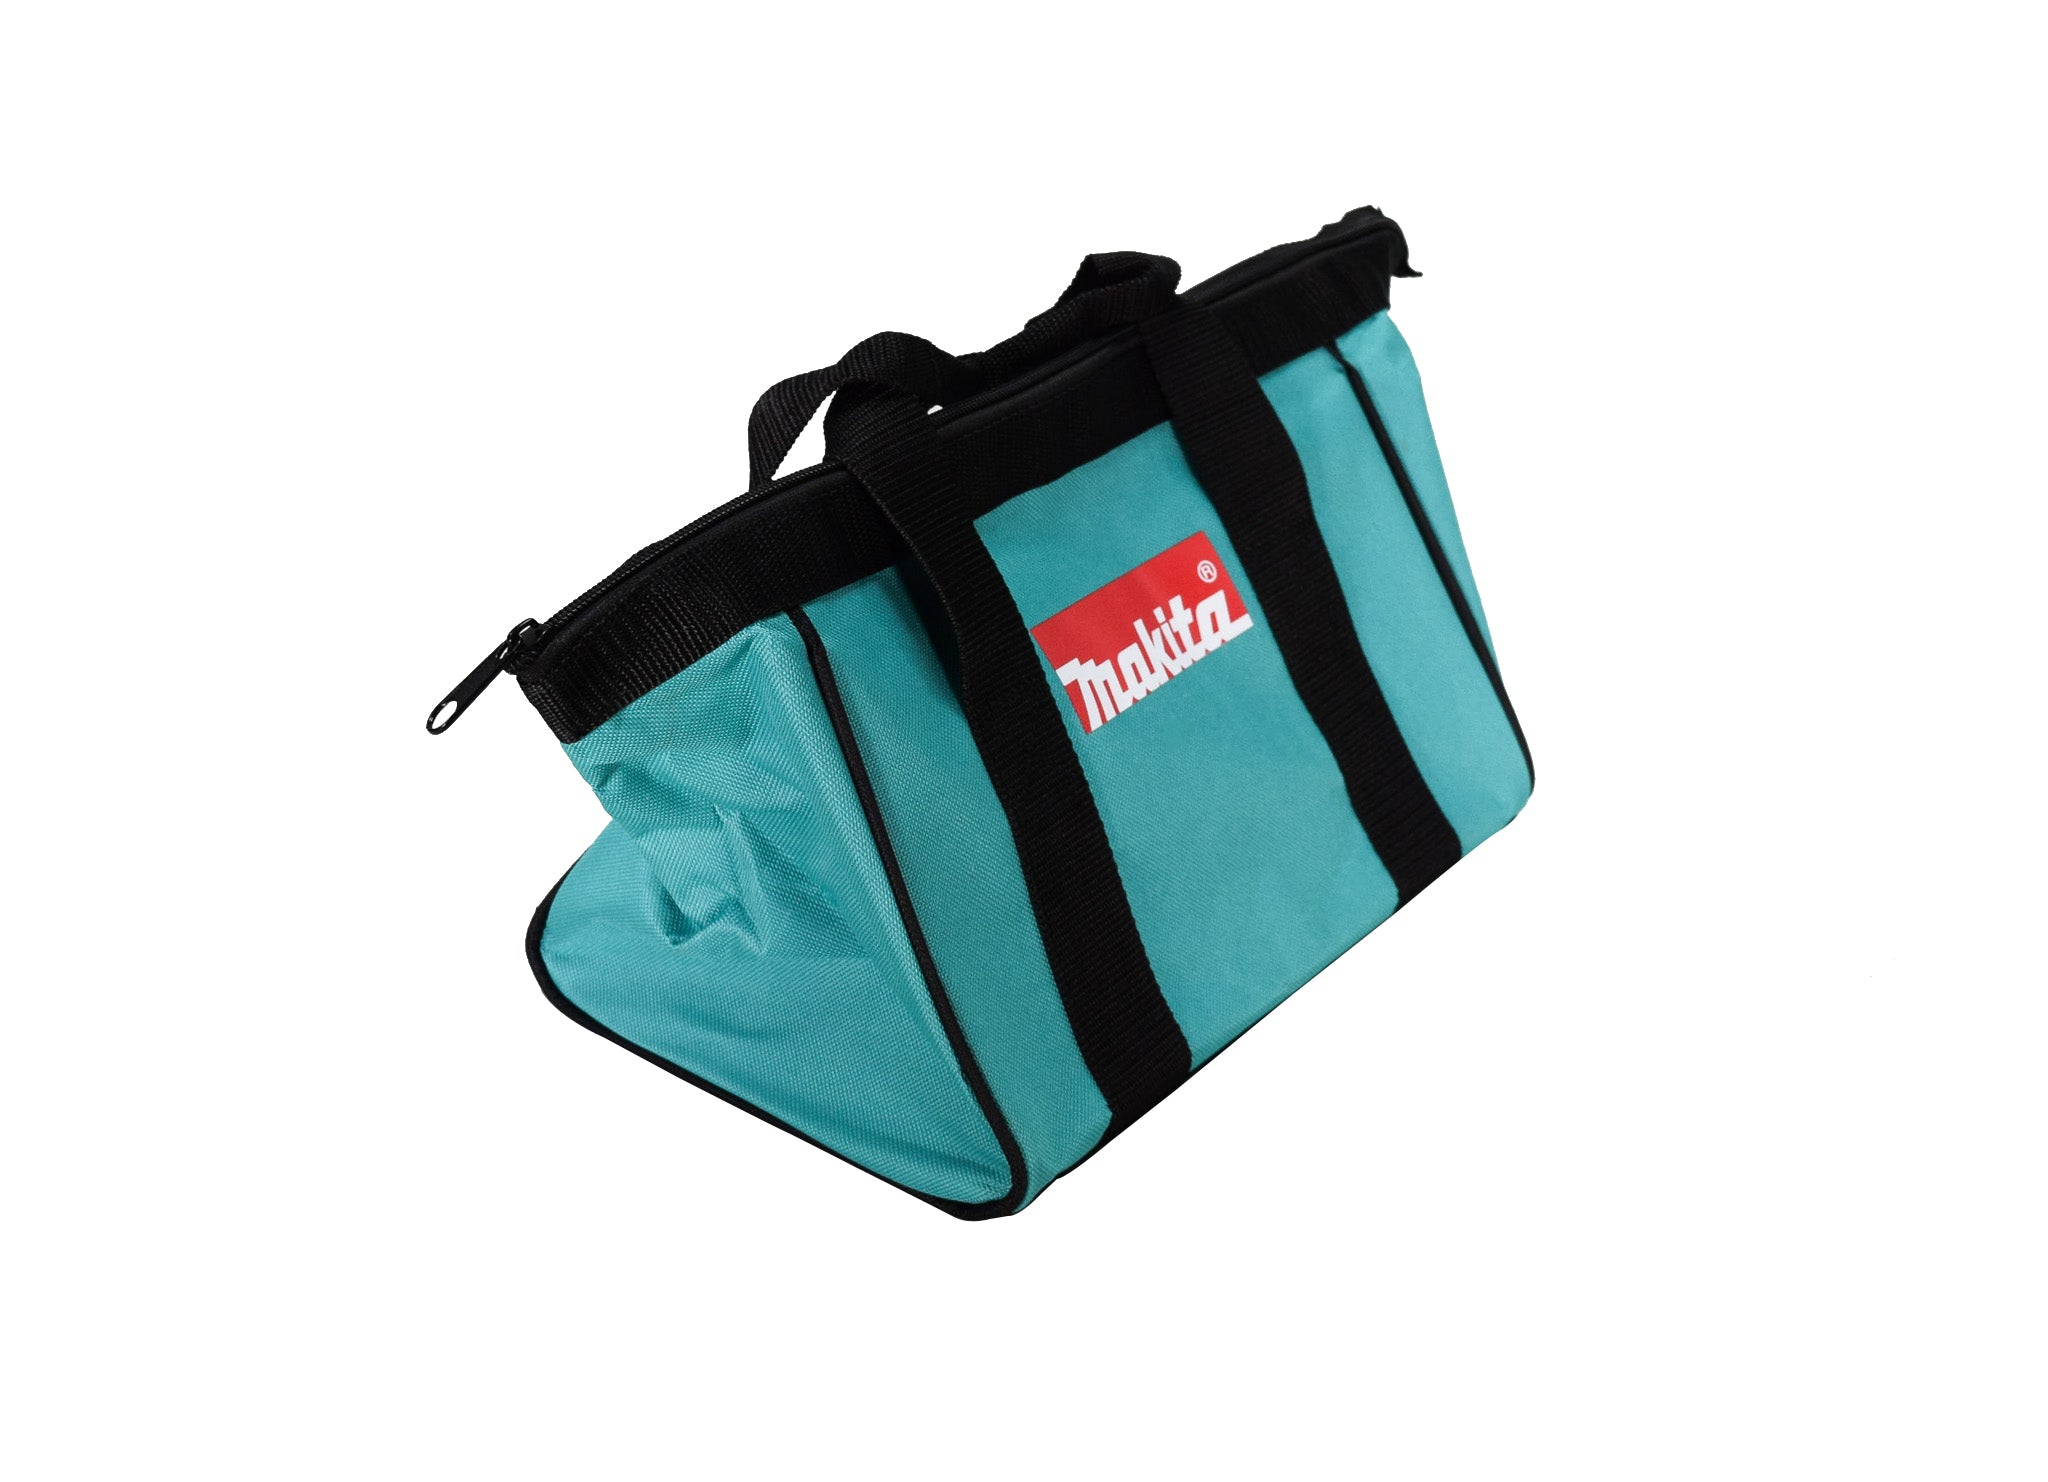 Makita Premium Padded Protective Guide Rail Bag for Track Saw Guide Rails  Up to 59 in. E-05664 - The Home Depot